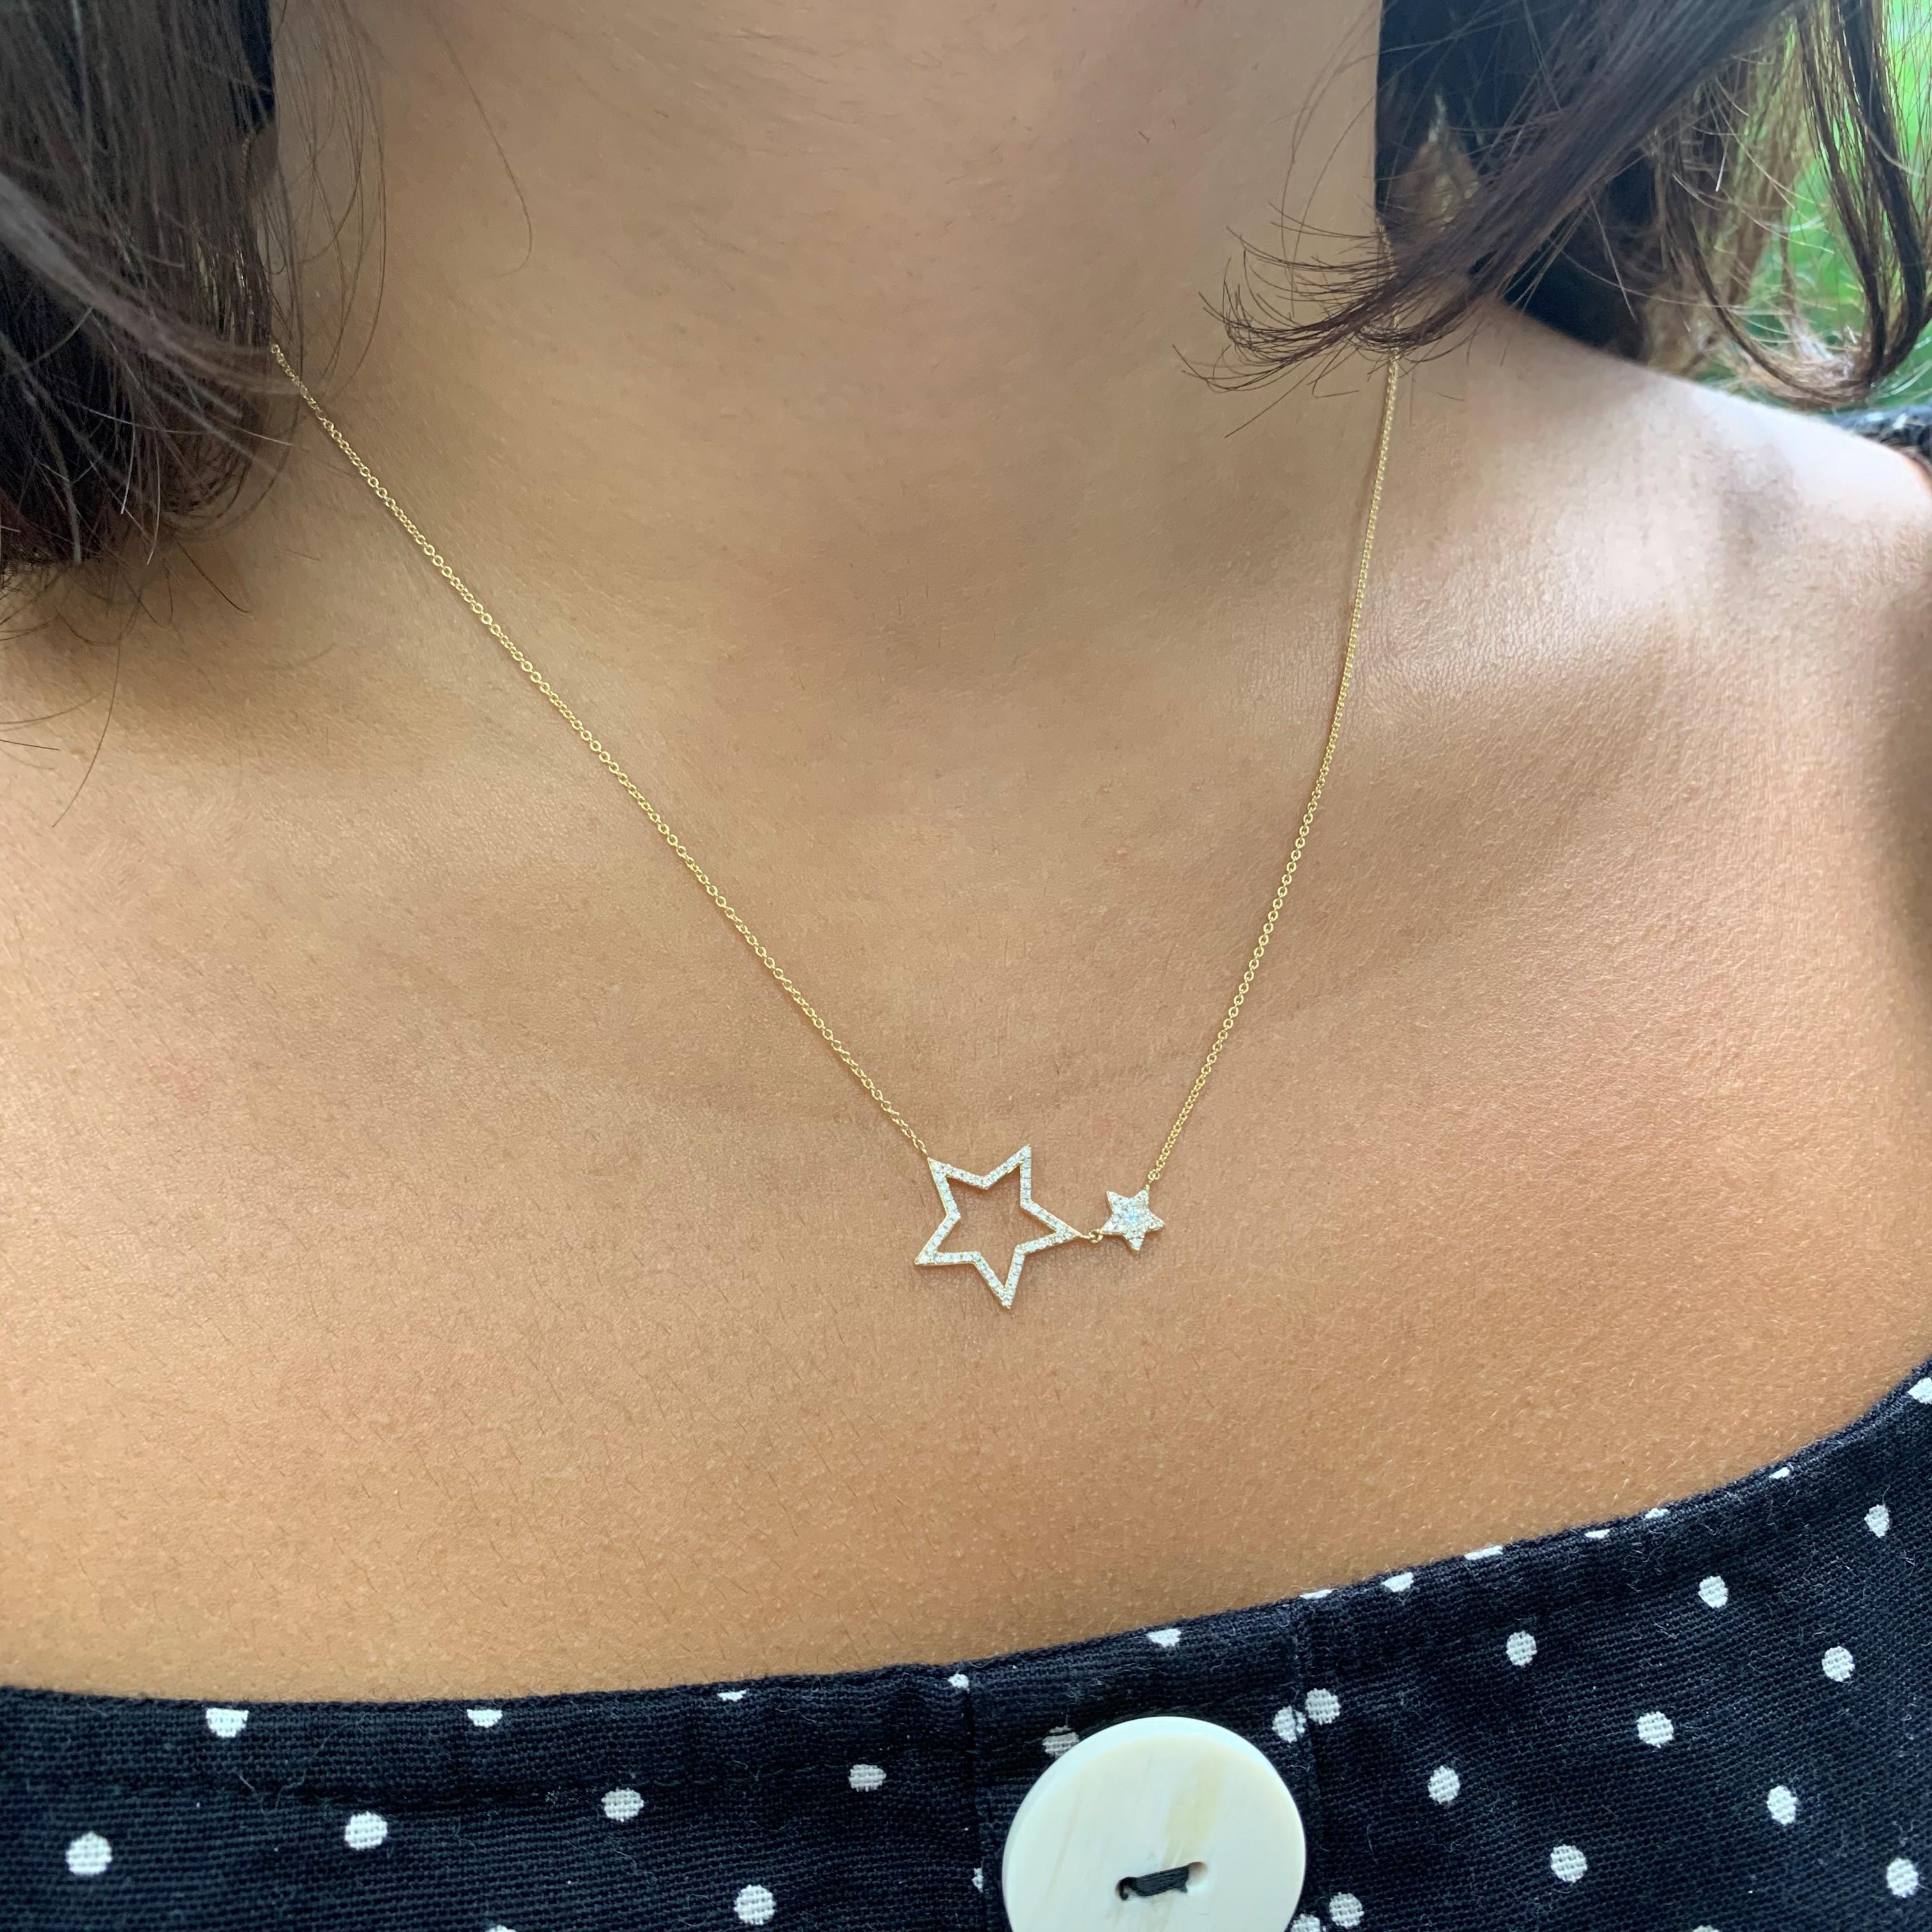 Pavé-set diamonds sparkle on 14k gold stars that curve in the center of this bar necklace. The pendant has a total diamond weight of approximately 0.22 carat, and suspends between a rolo chain that adjusts at 15-, 16-, and 18 inches in length. The